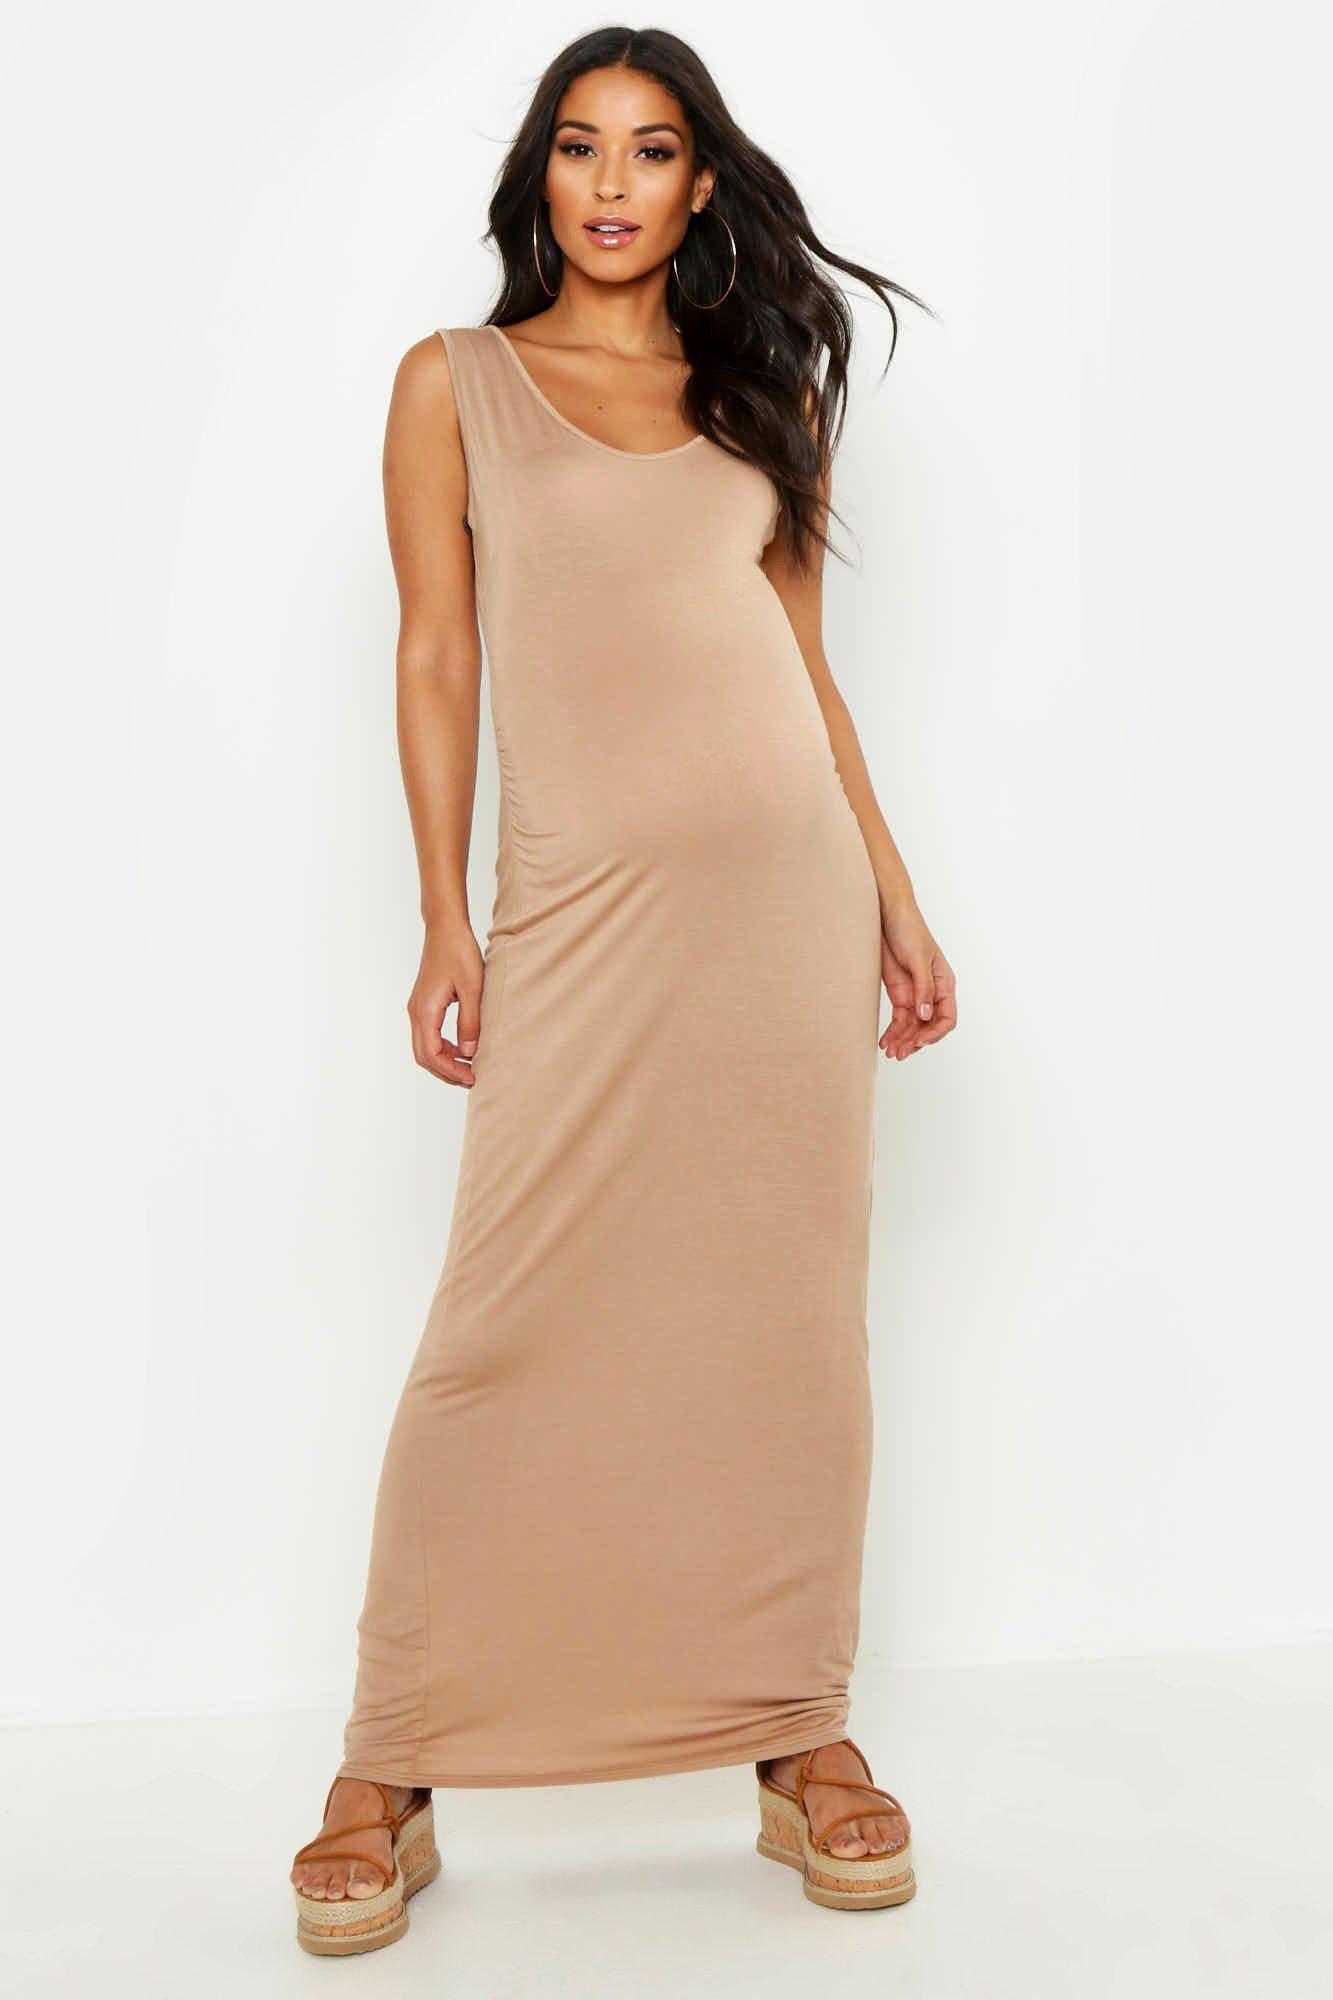 Boohoo Maternity Scoop Neck Maxi Dress in Natural - Lyst